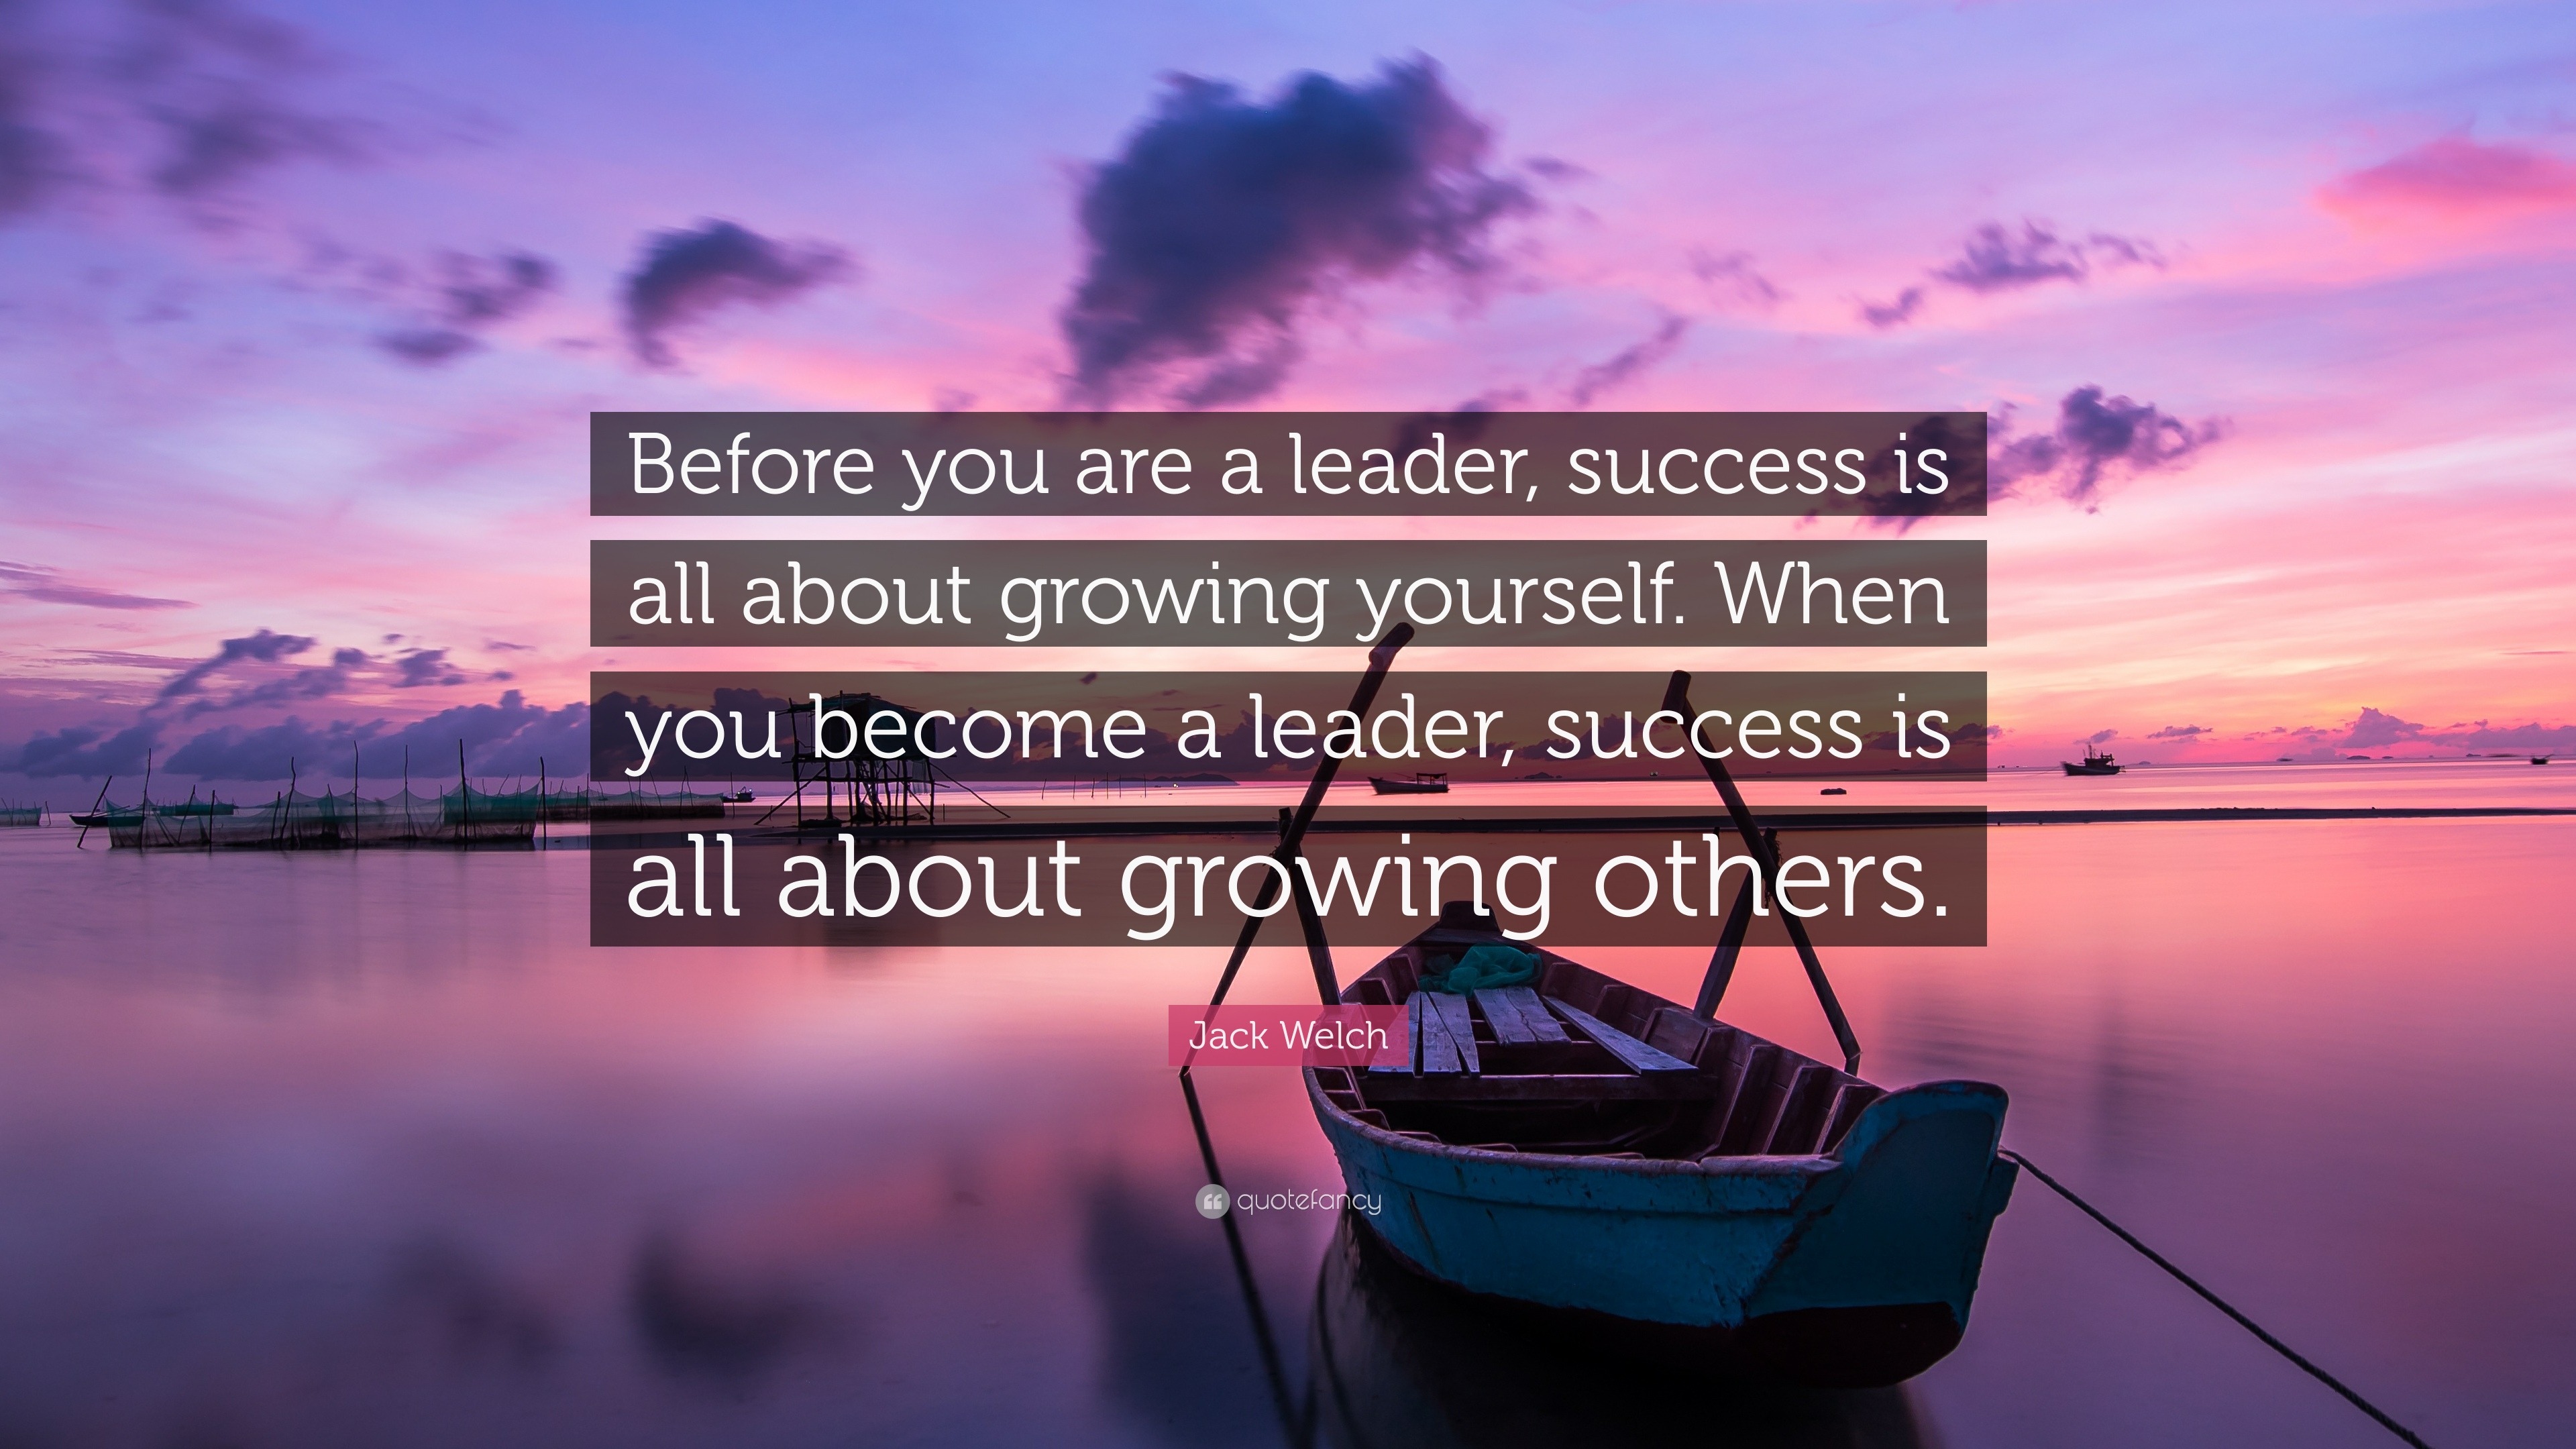 Jack Welch Quote: “Before you are a leader, success is all about